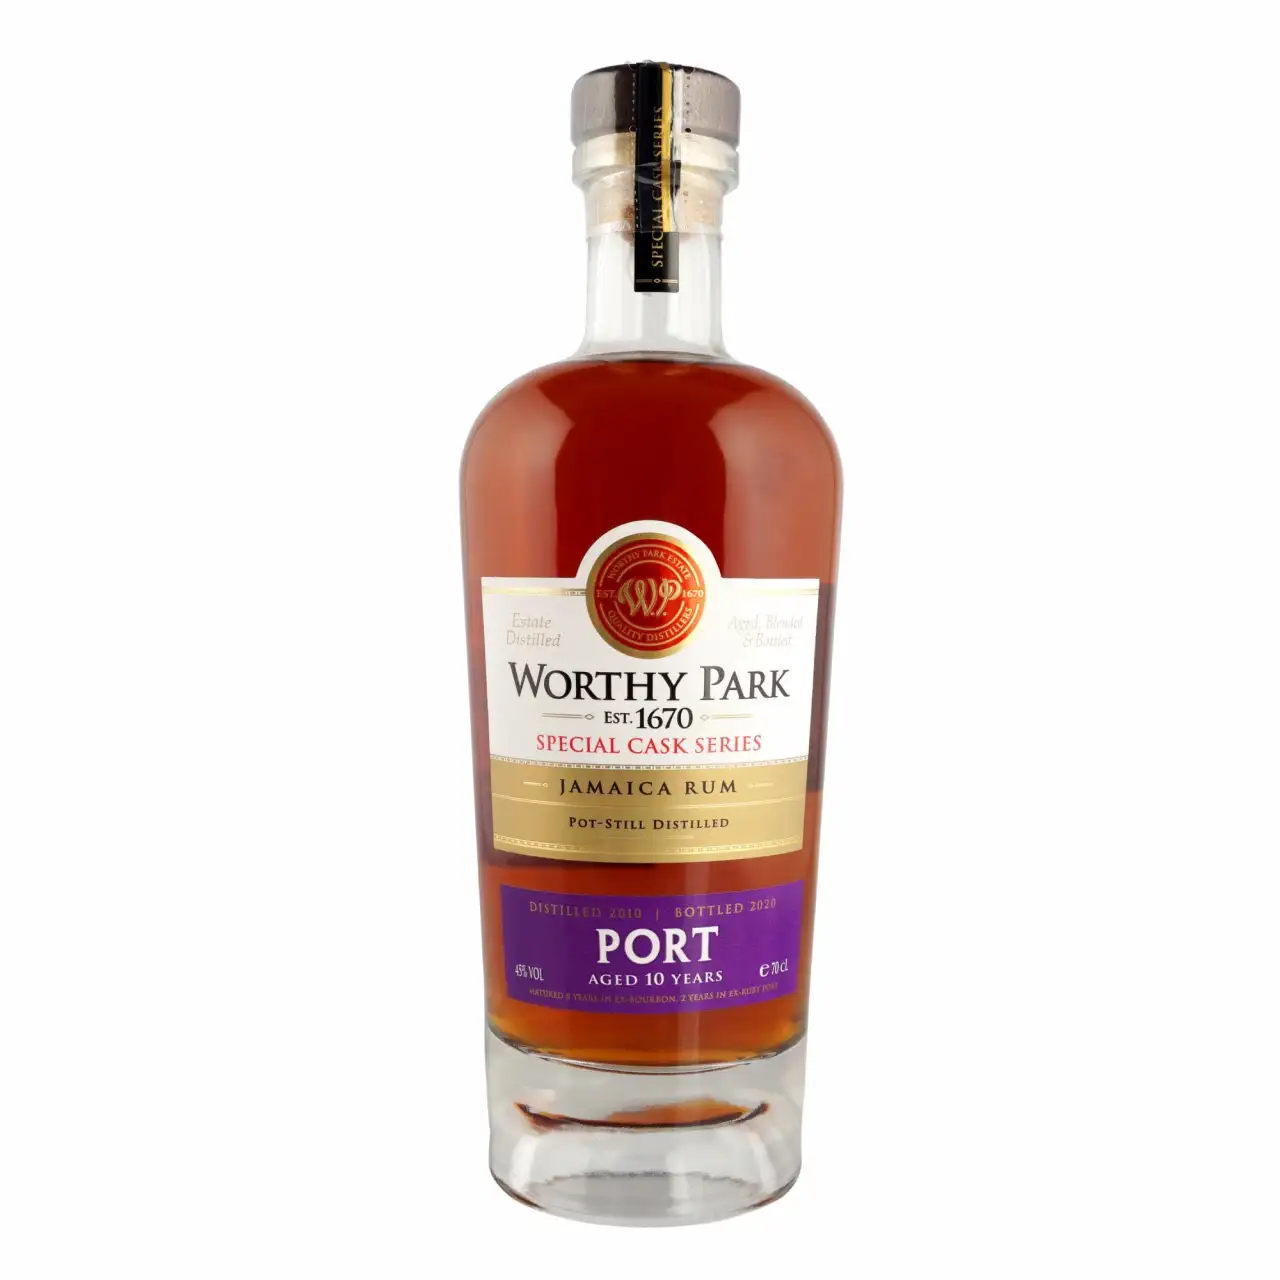 Image of the front of the bottle of the rum Special Cask Series Port